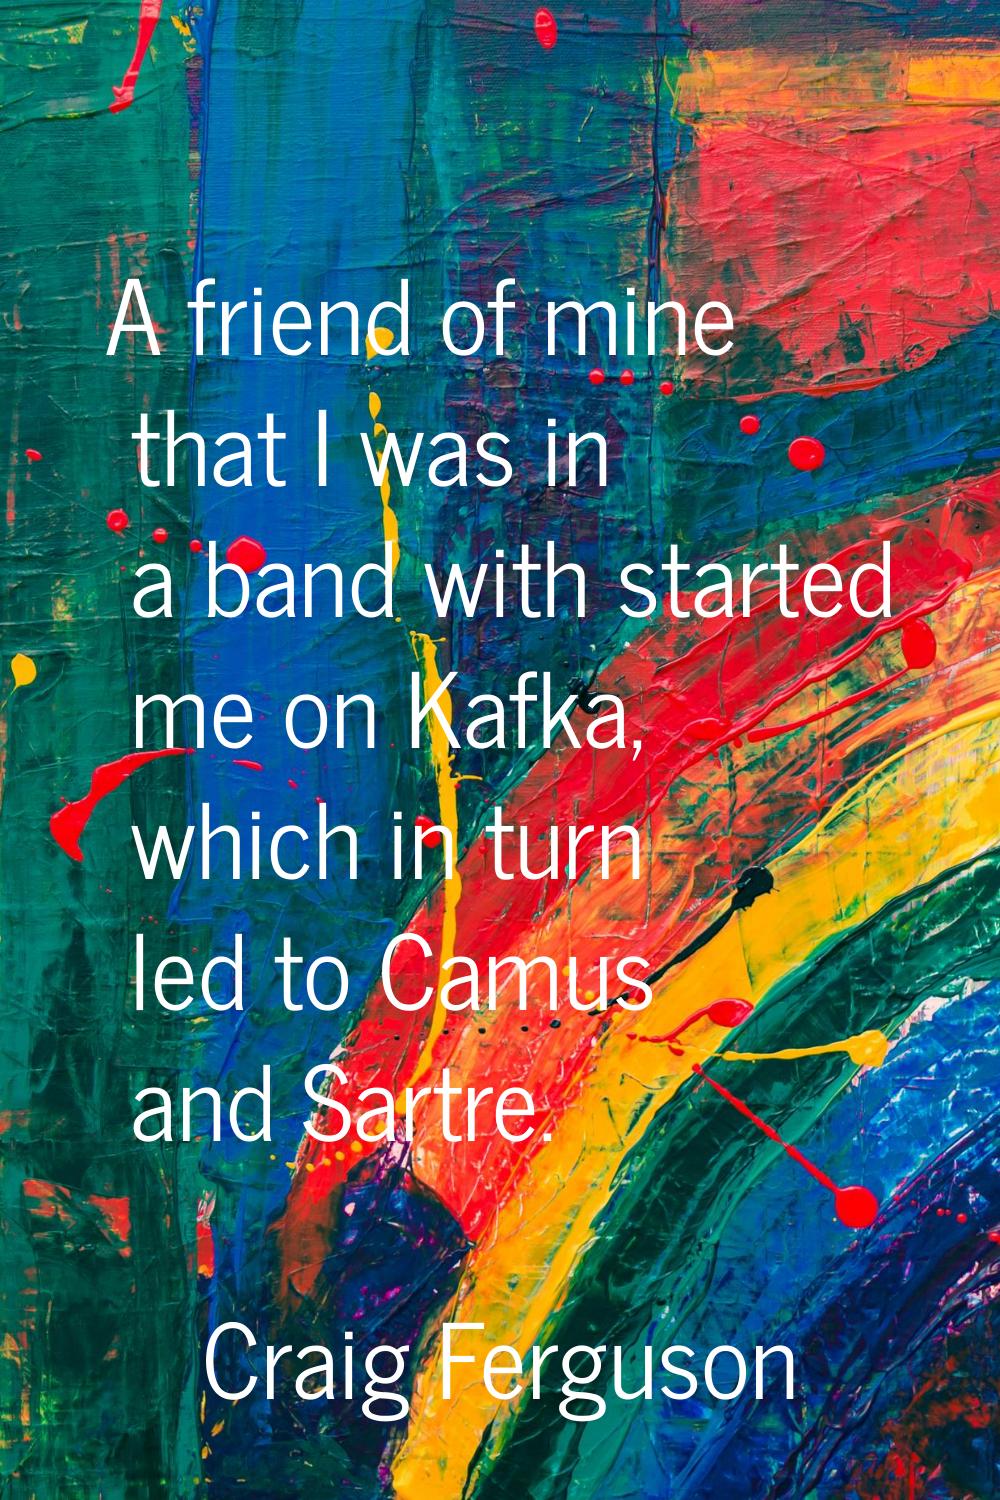 A friend of mine that I was in a band with started me on Kafka, which in turn led to Camus and Sart